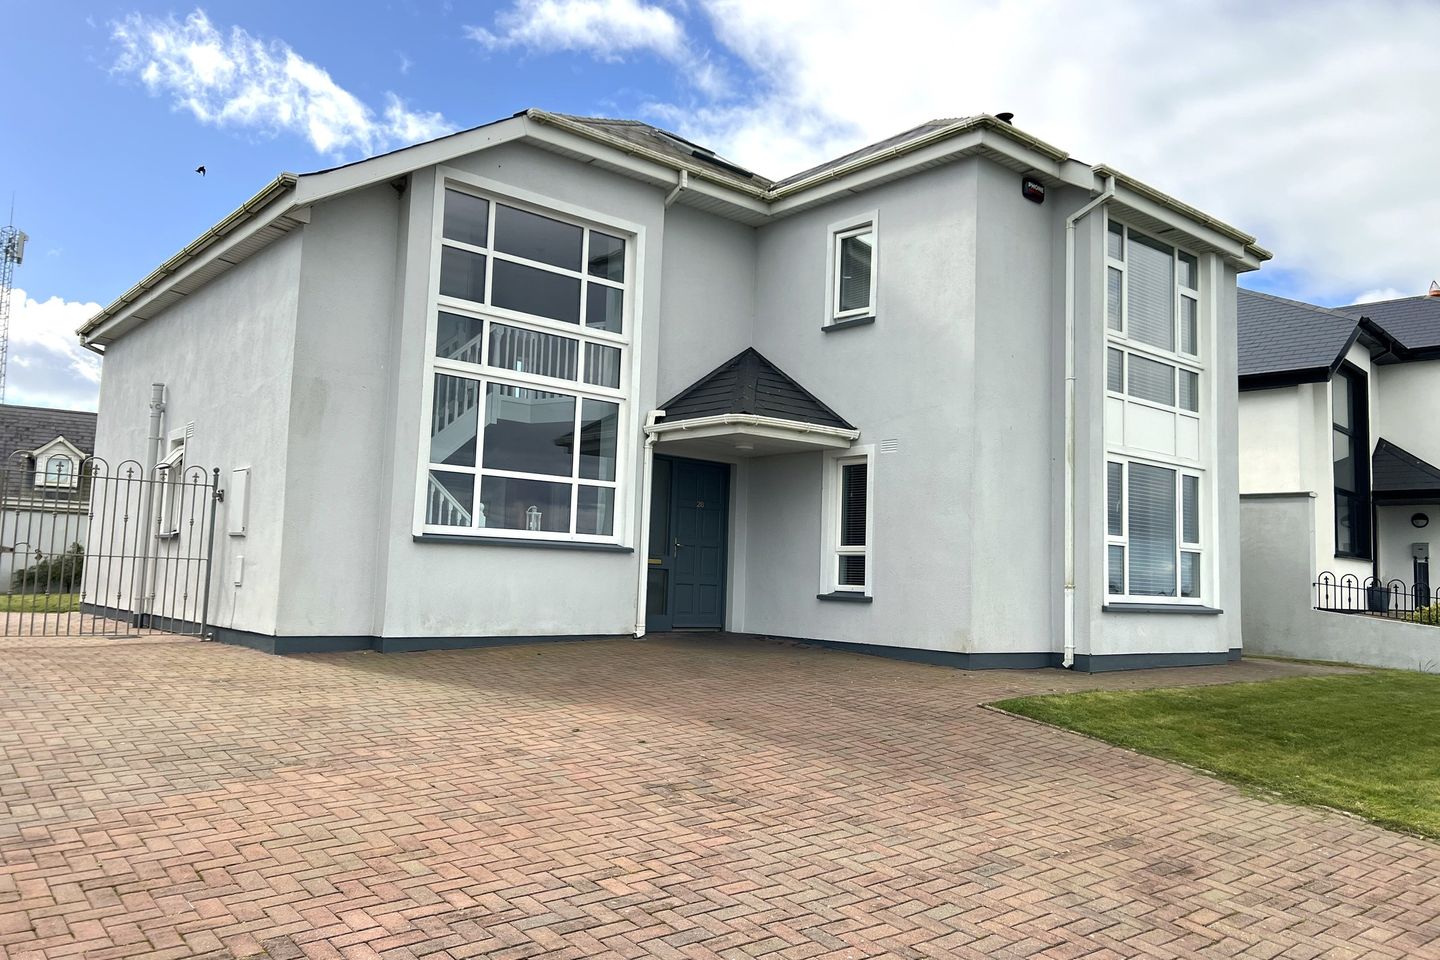 28 Barr Na Háille, Rosslare Harbour, Co. Wexford, Y35NN62